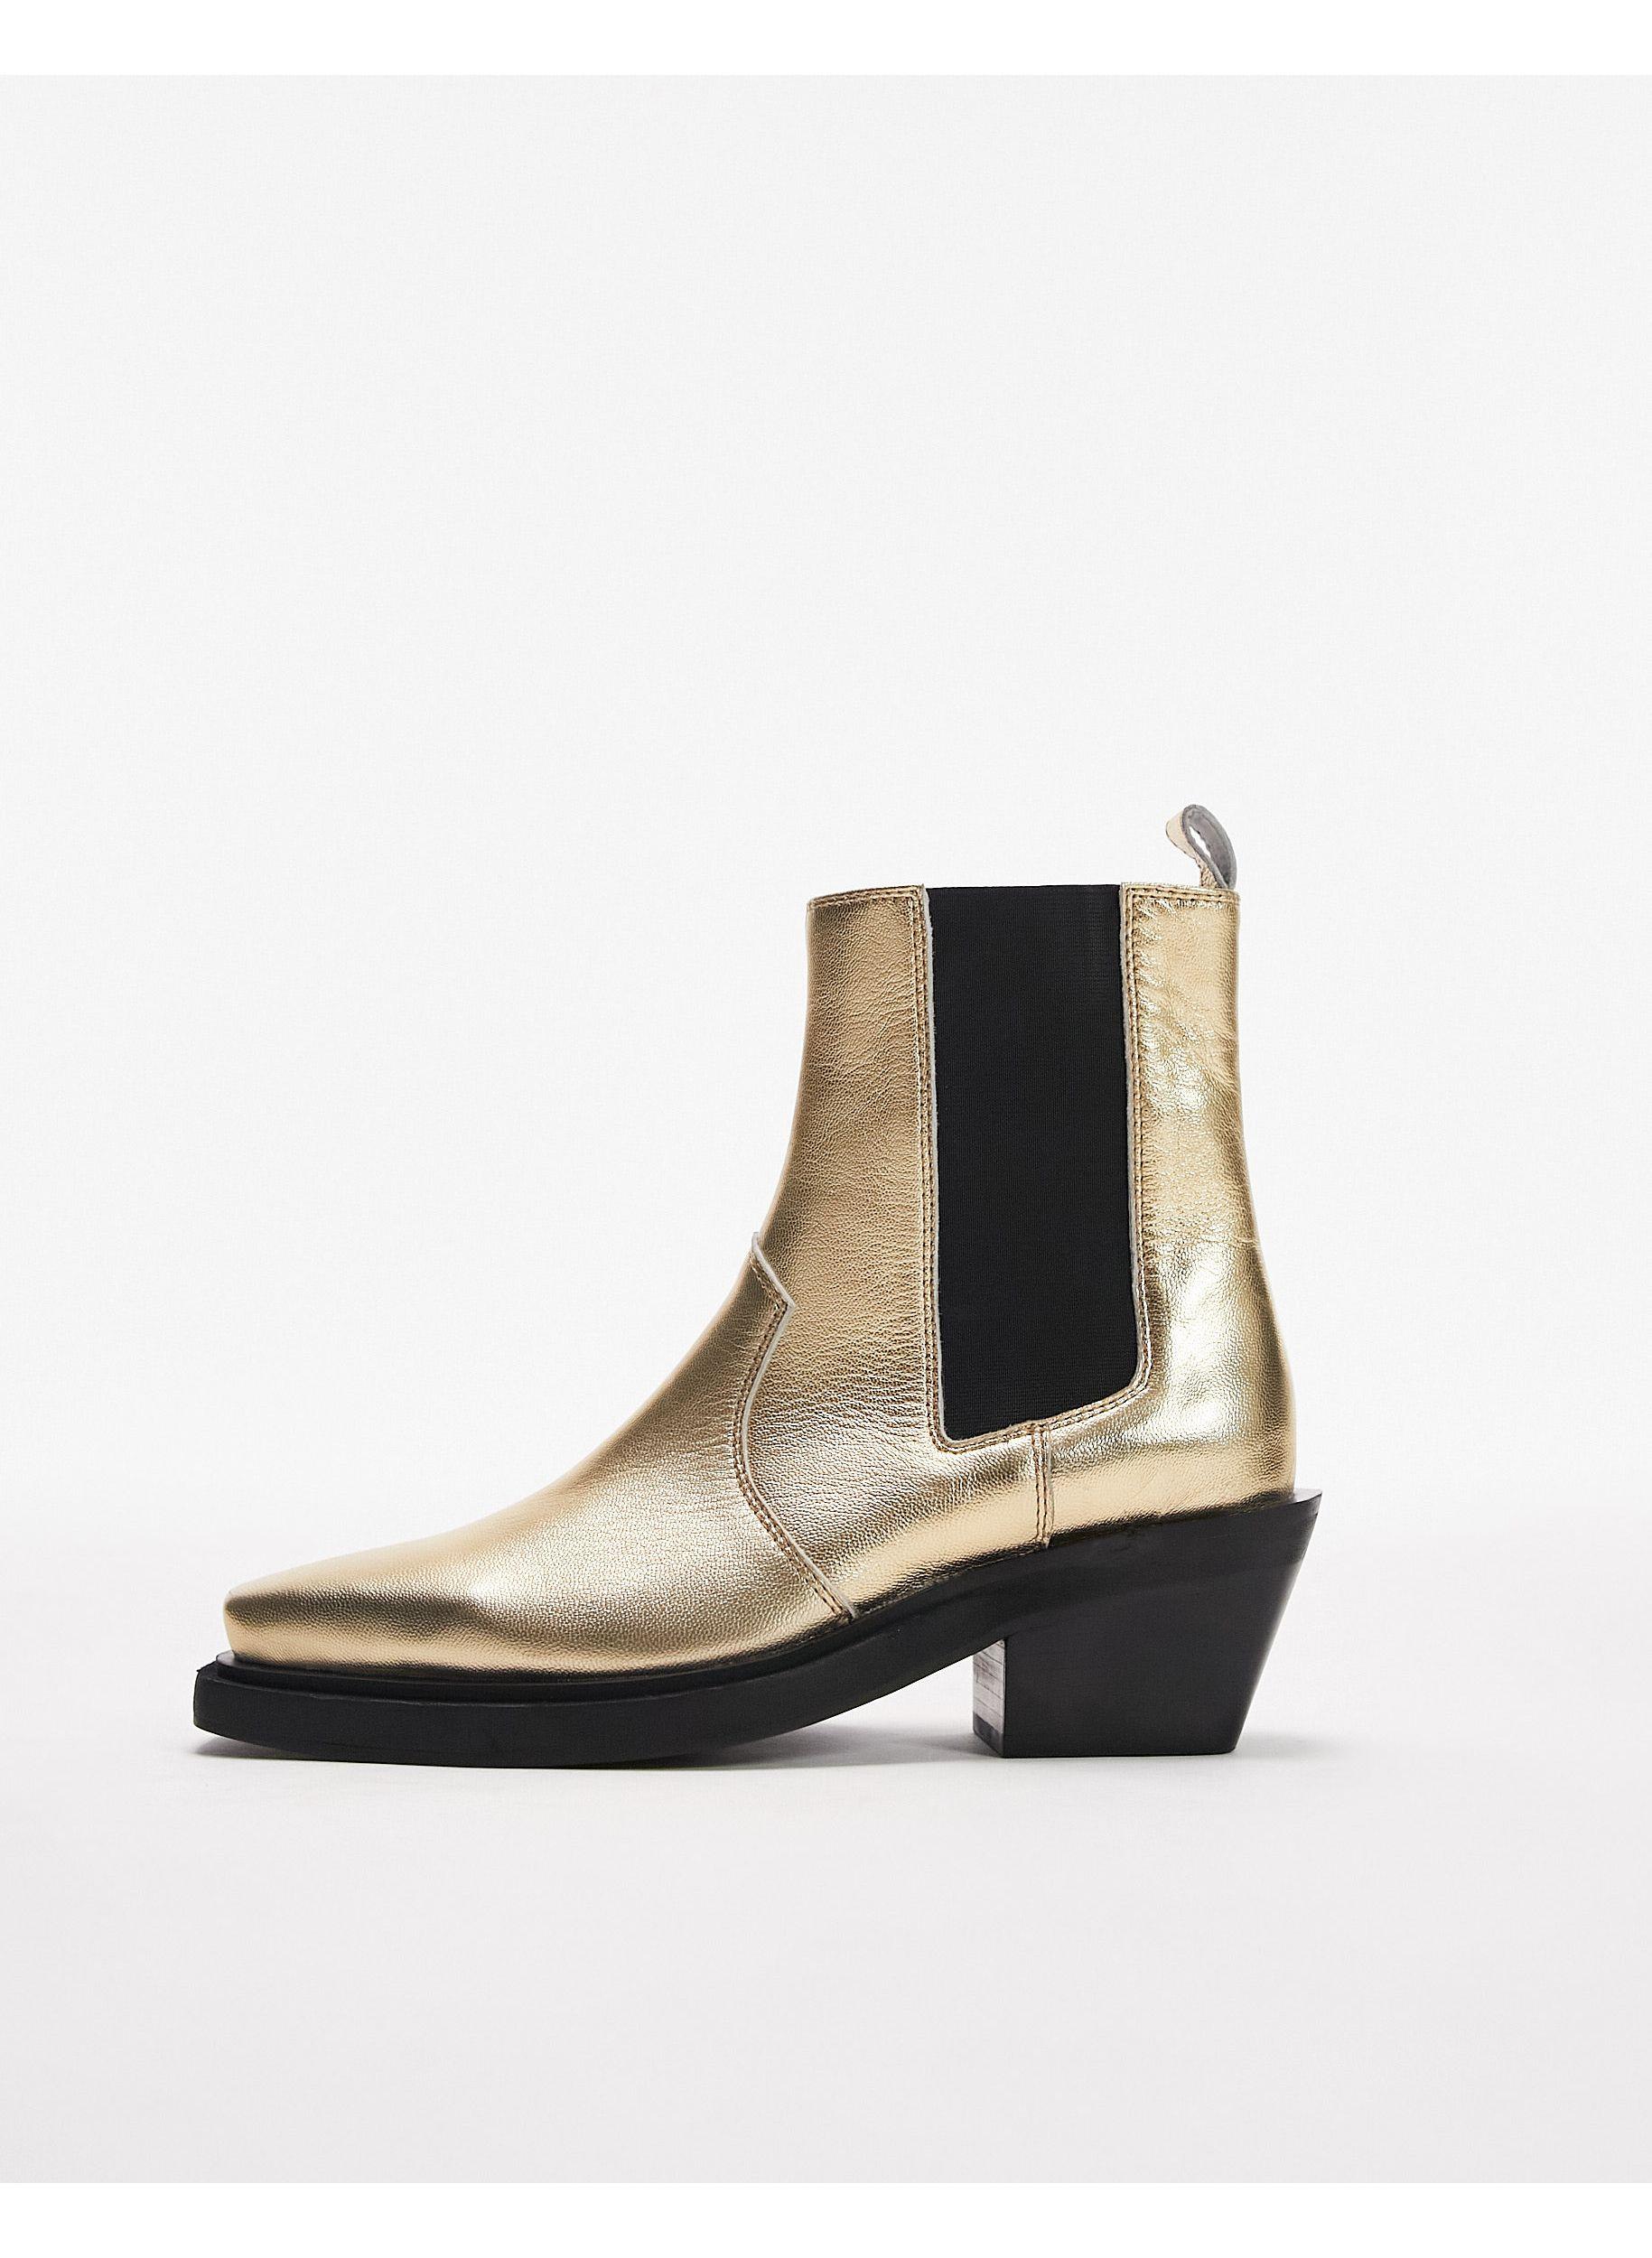 TOPSHOP Maeve Leather Western Ankle Boots in White | Lyst